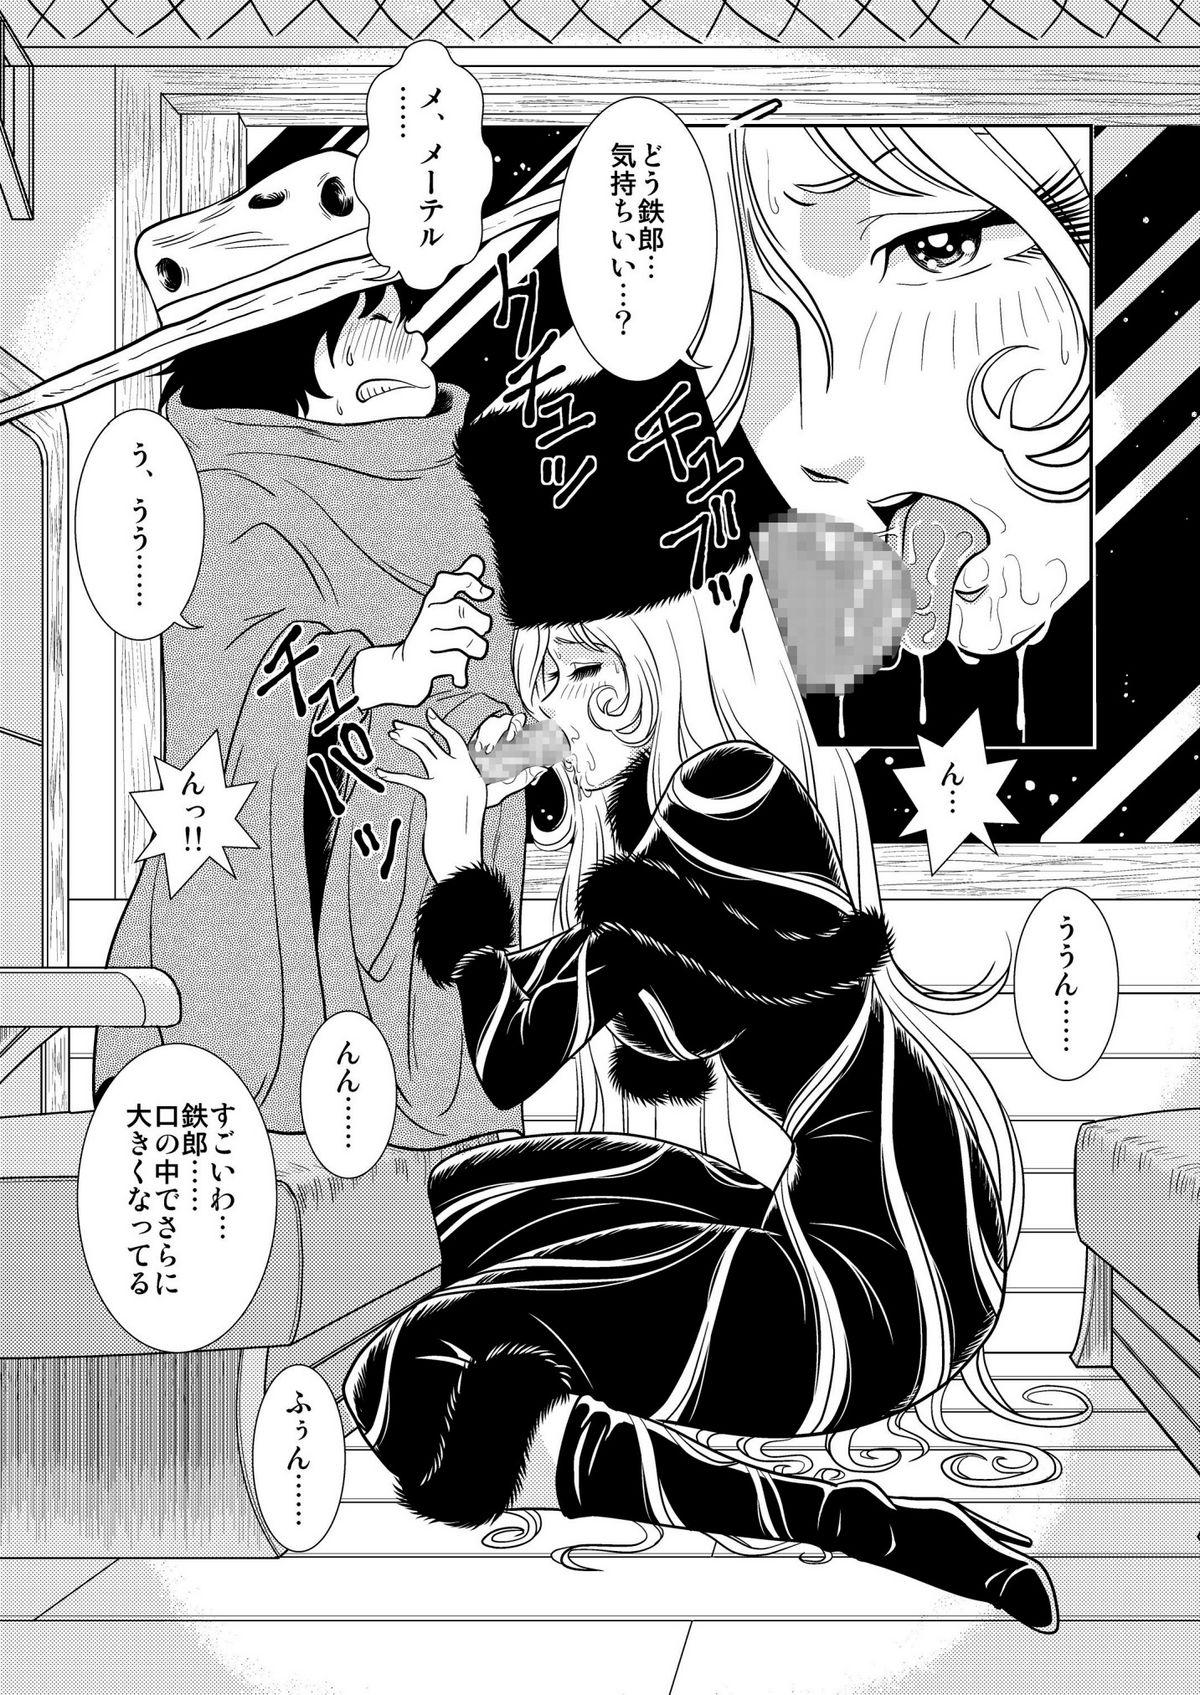 Sofa Maetel Story 2 - Galaxy express 999 Jeans - Page 9